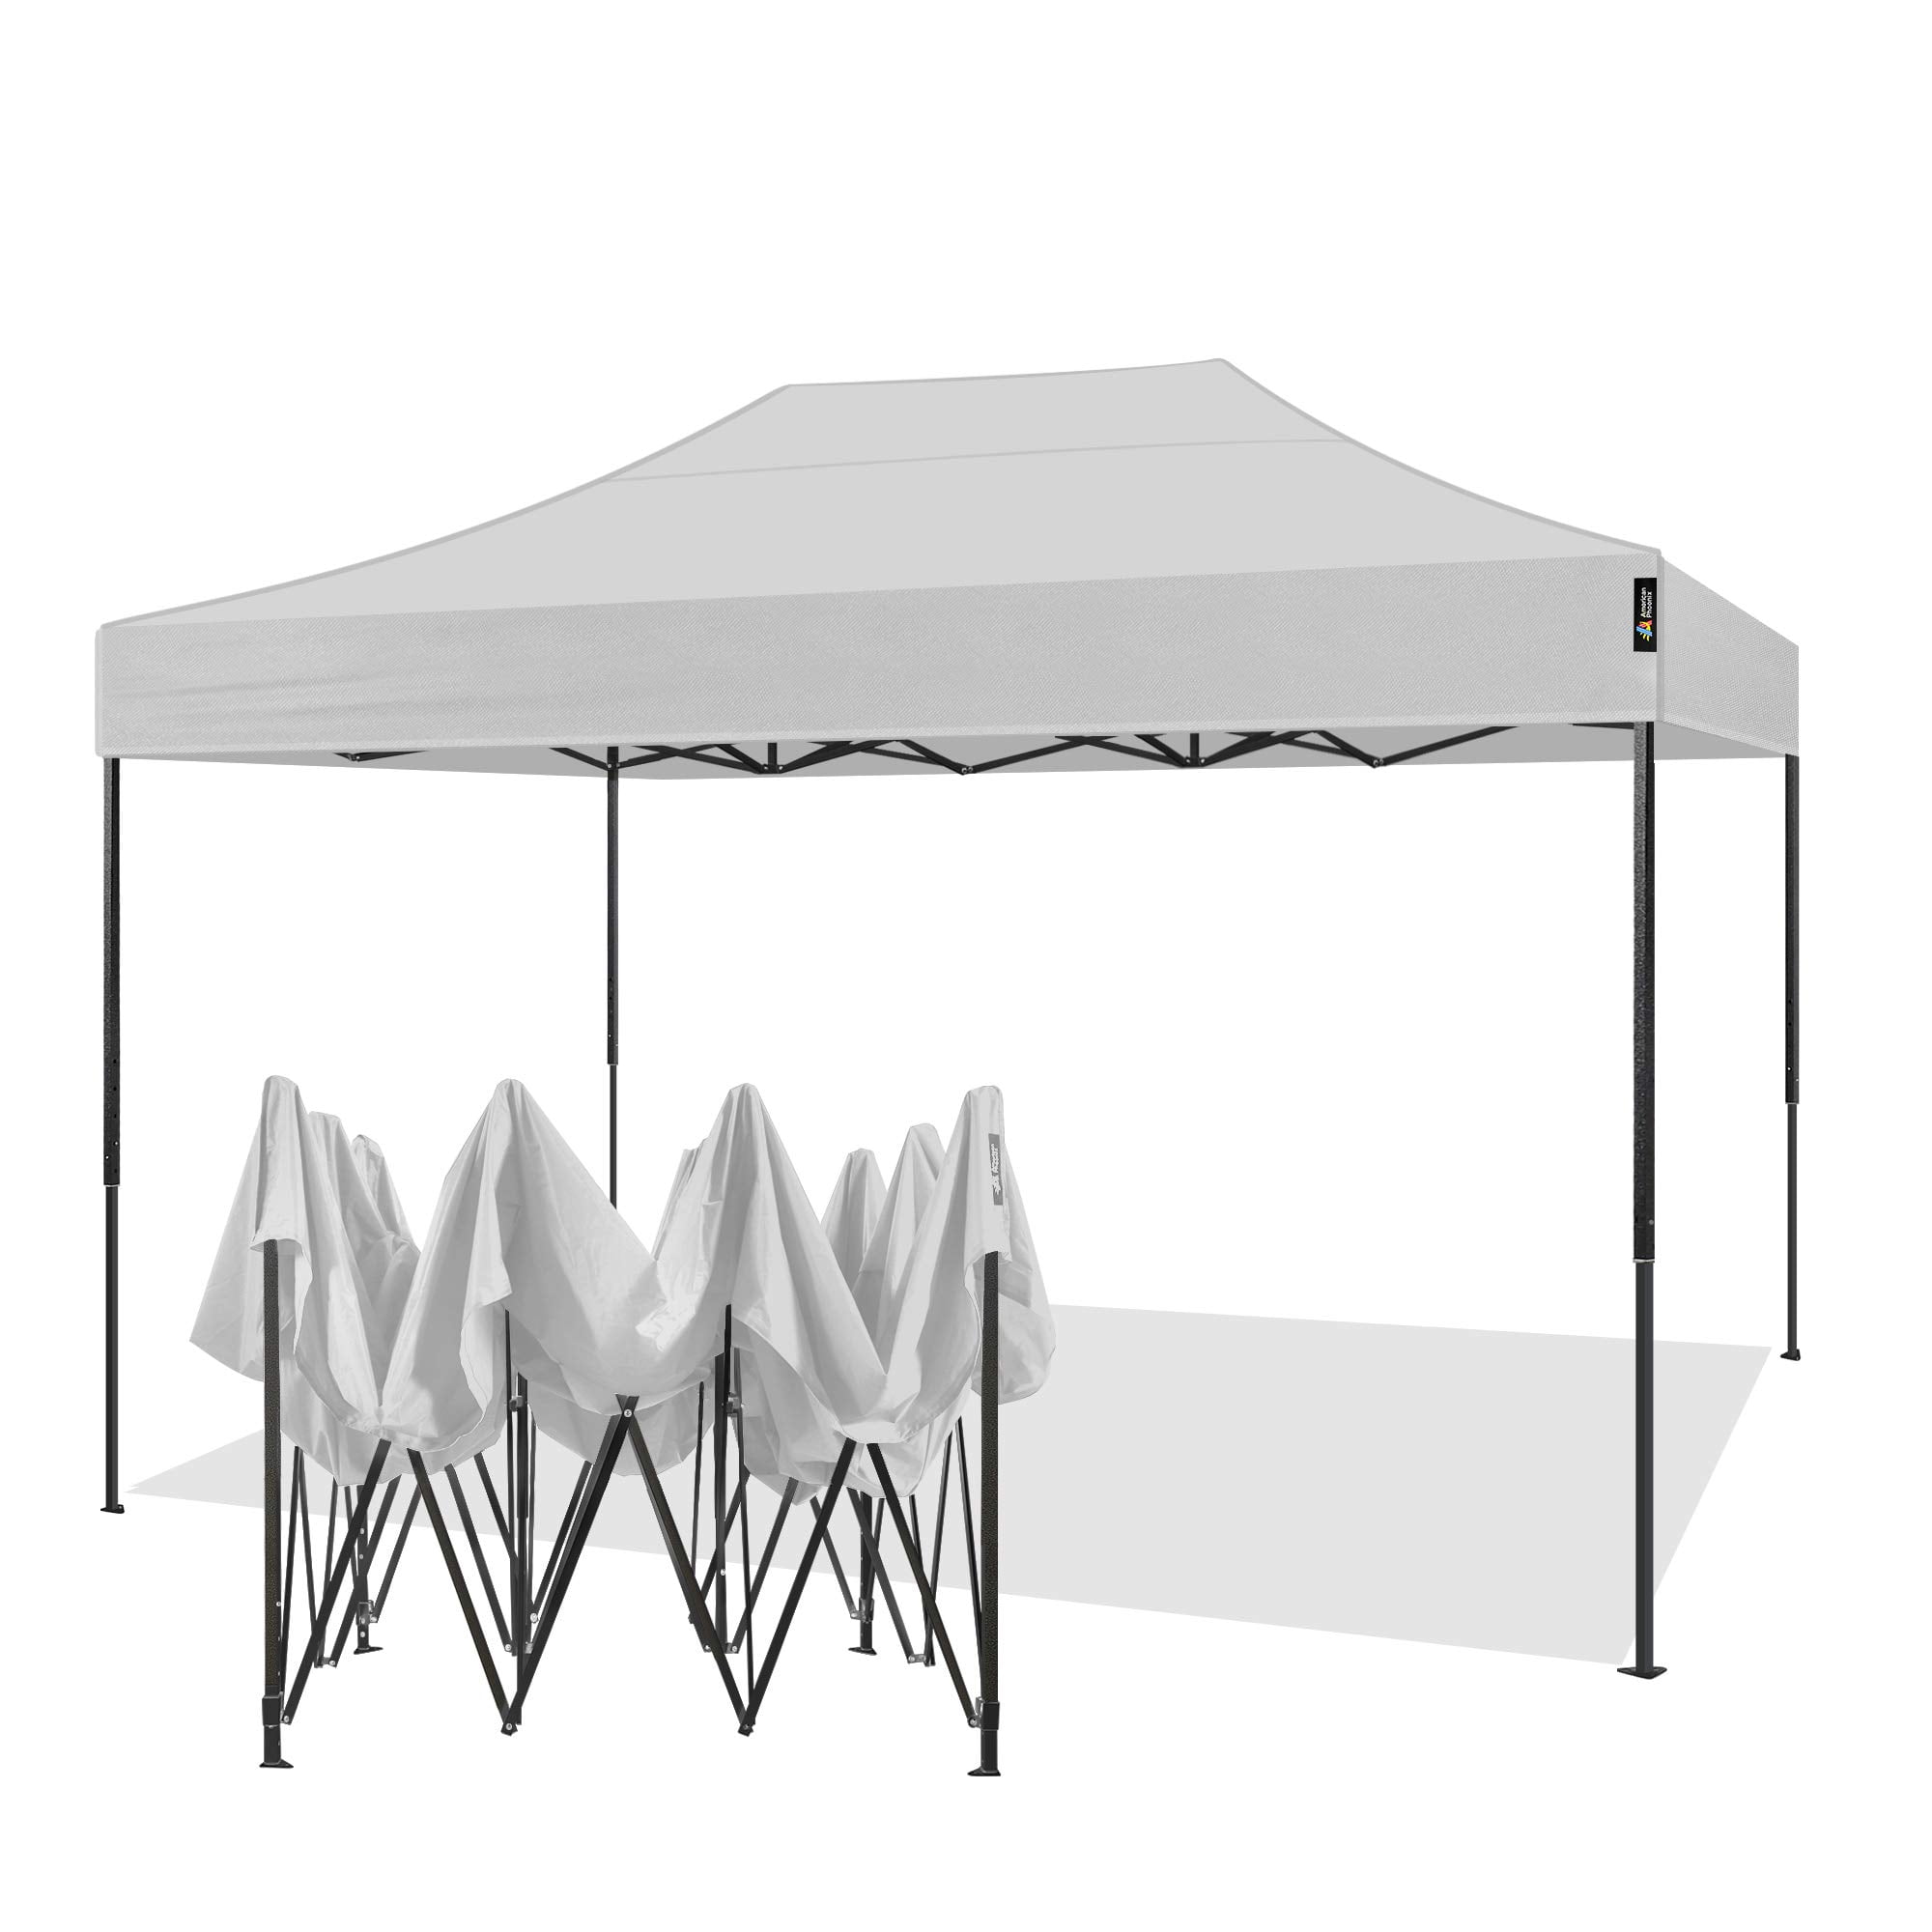 Canopy Ten 10x10 Commercial Fair Shelter Car Shelter Wedding Party Easy Pop Up 